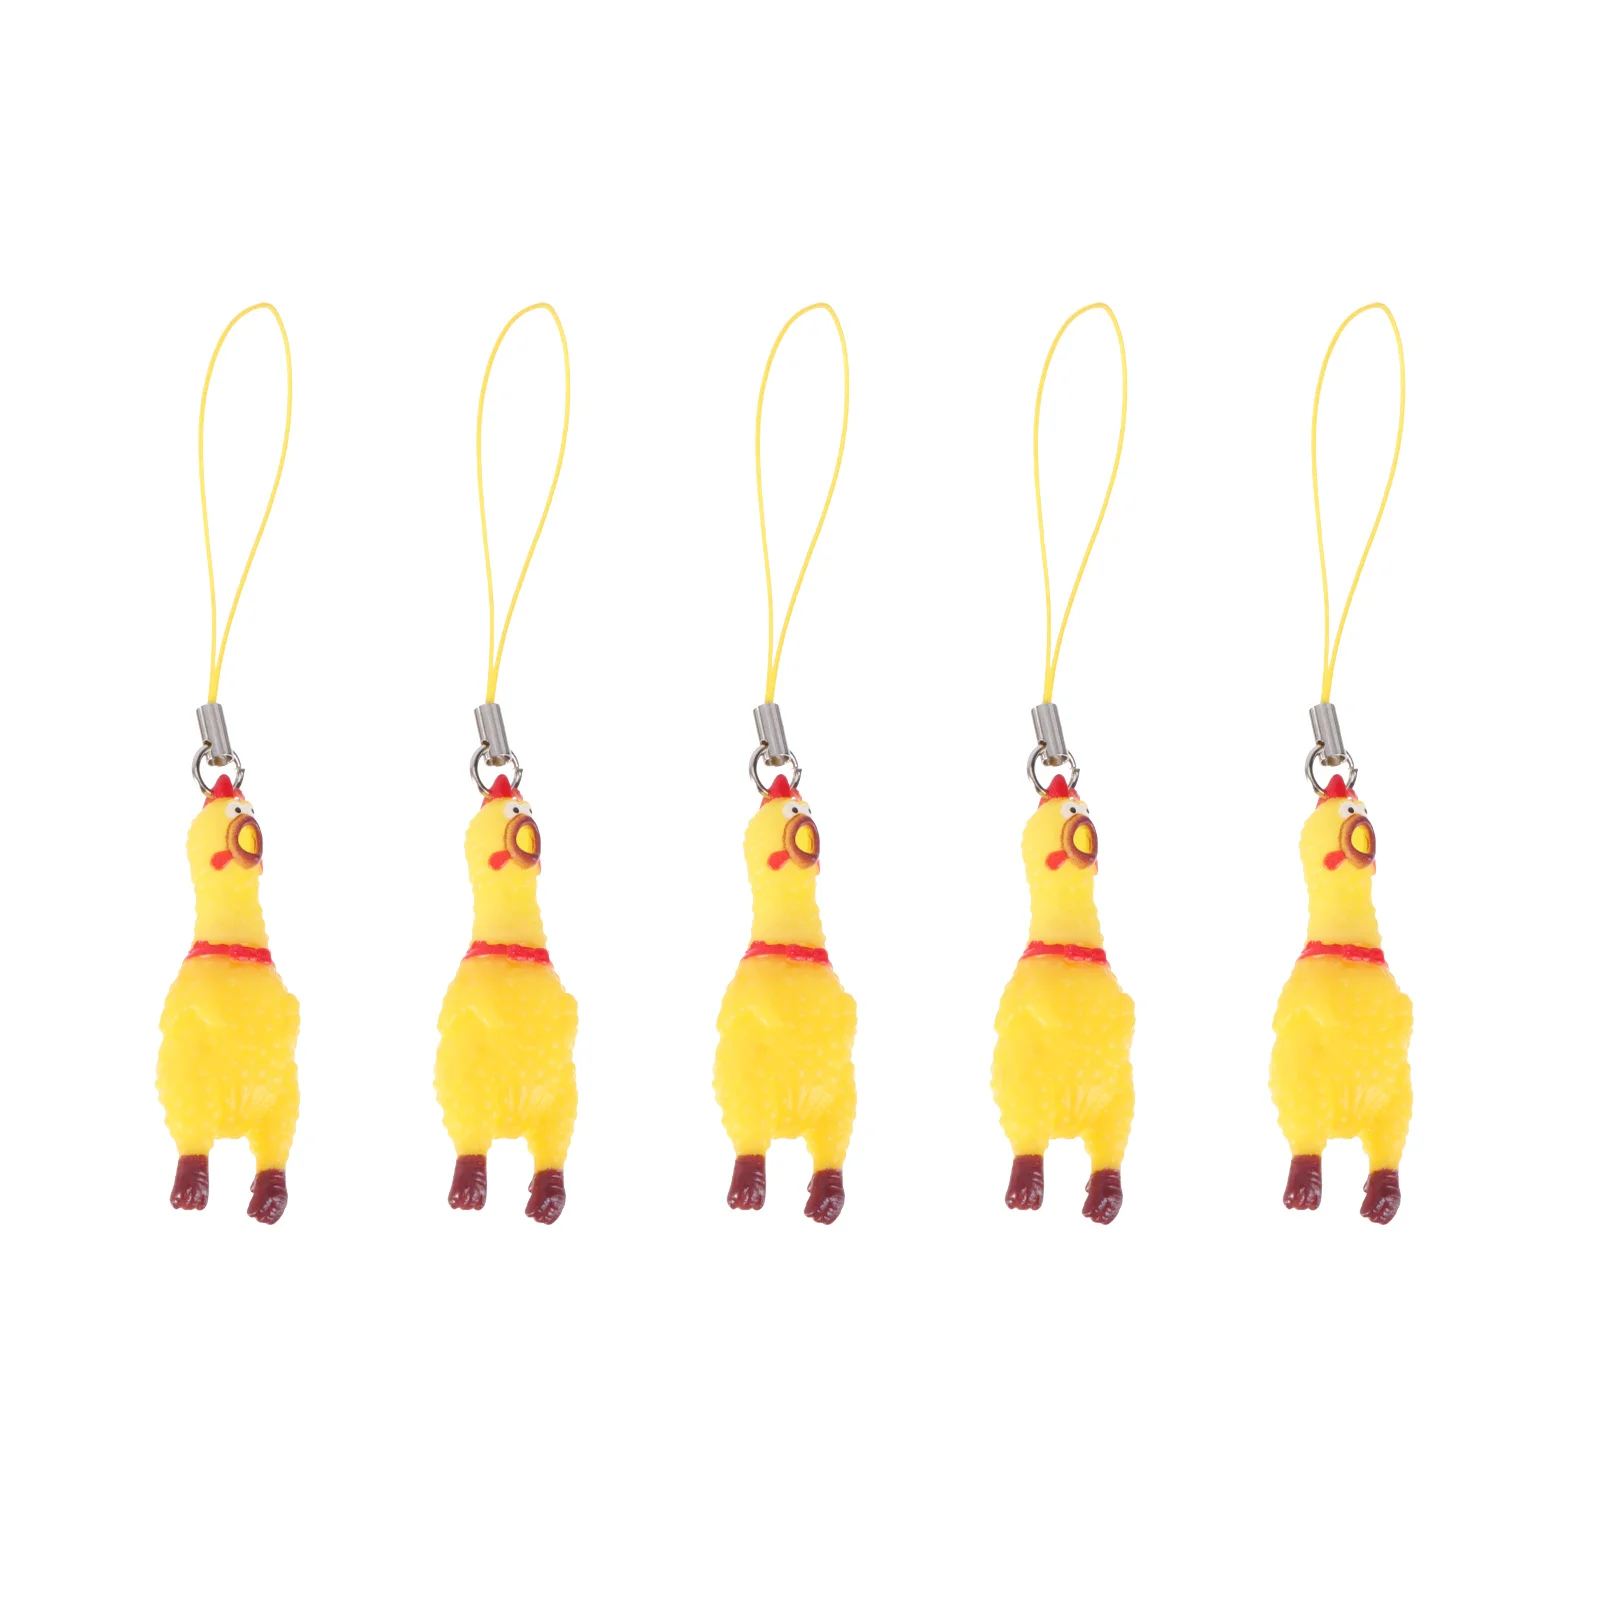 

Chicken Keychain Rubber Screaming Key Toy Pendant Squeeze Keychainscharm Squeaking Funny Minichains Chain Dog Squeaky Lanyard